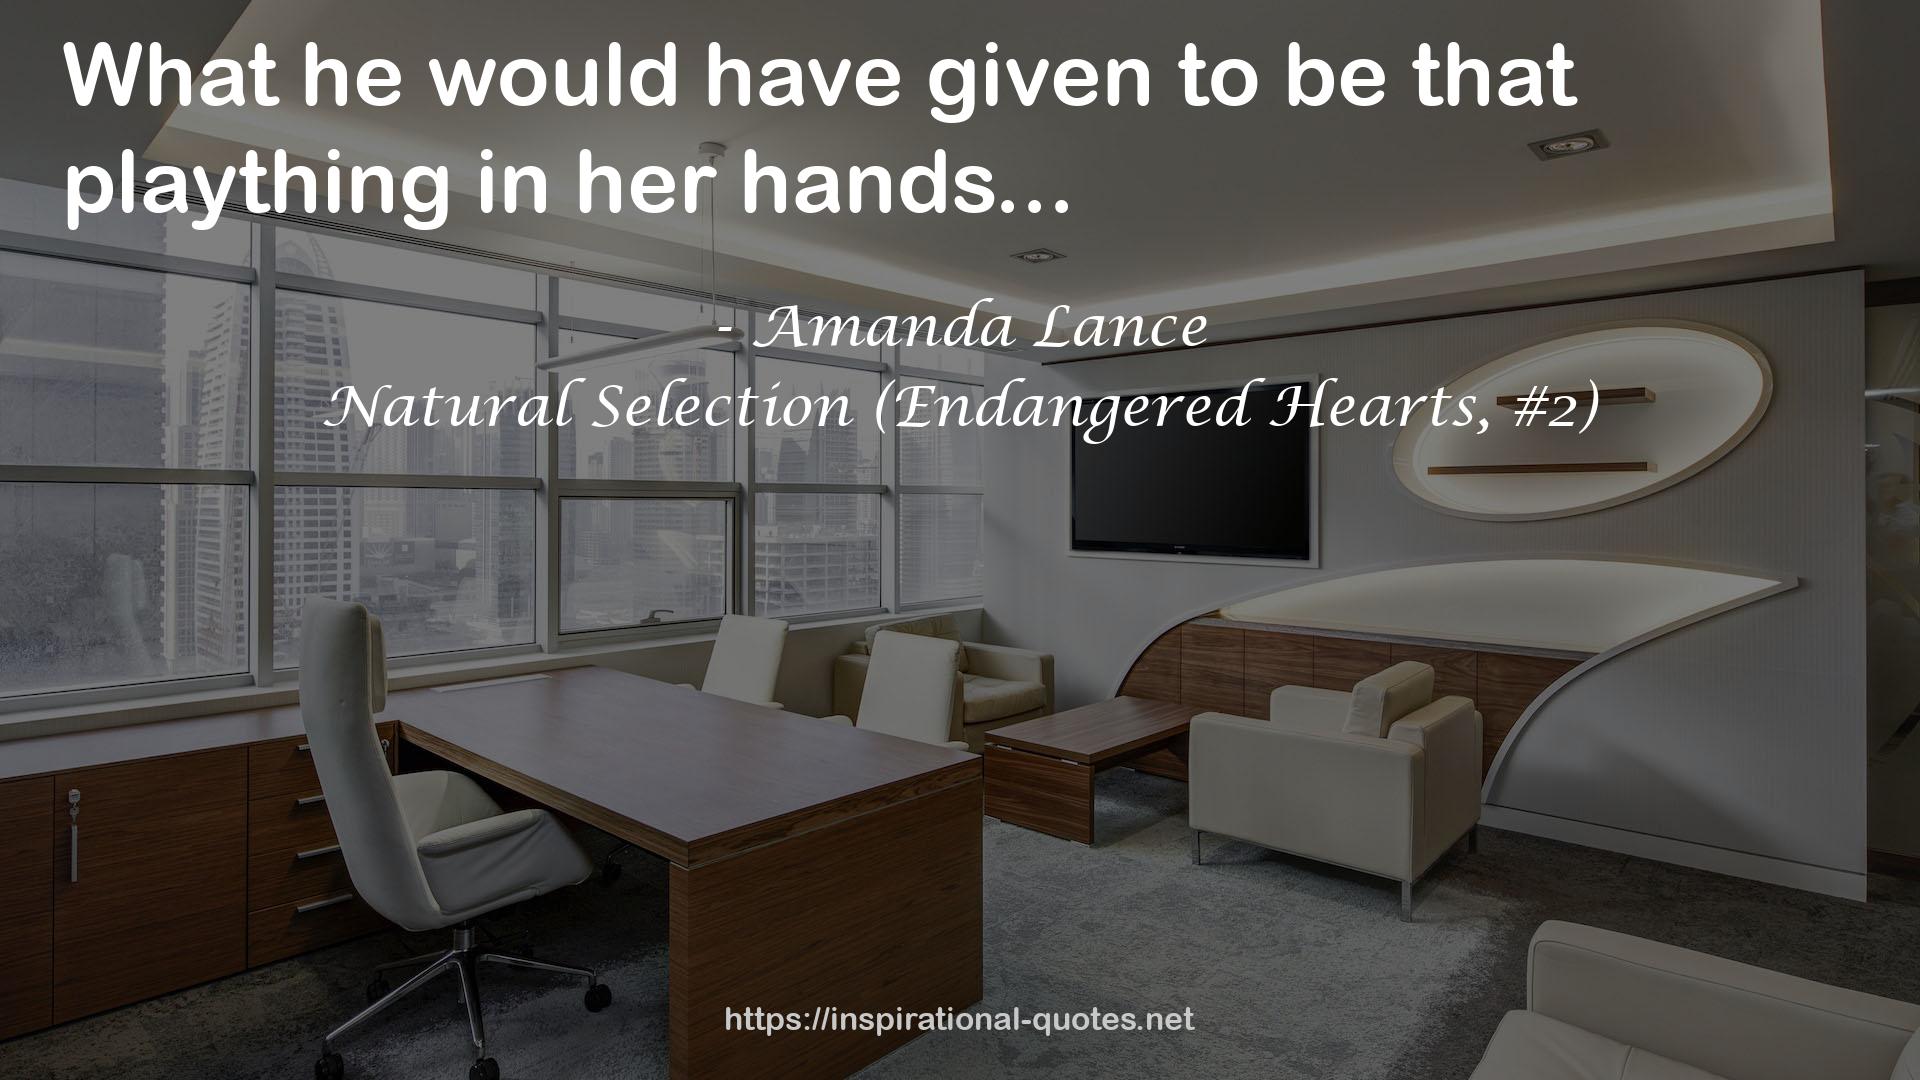 Natural Selection (Endangered Hearts, #2) QUOTES